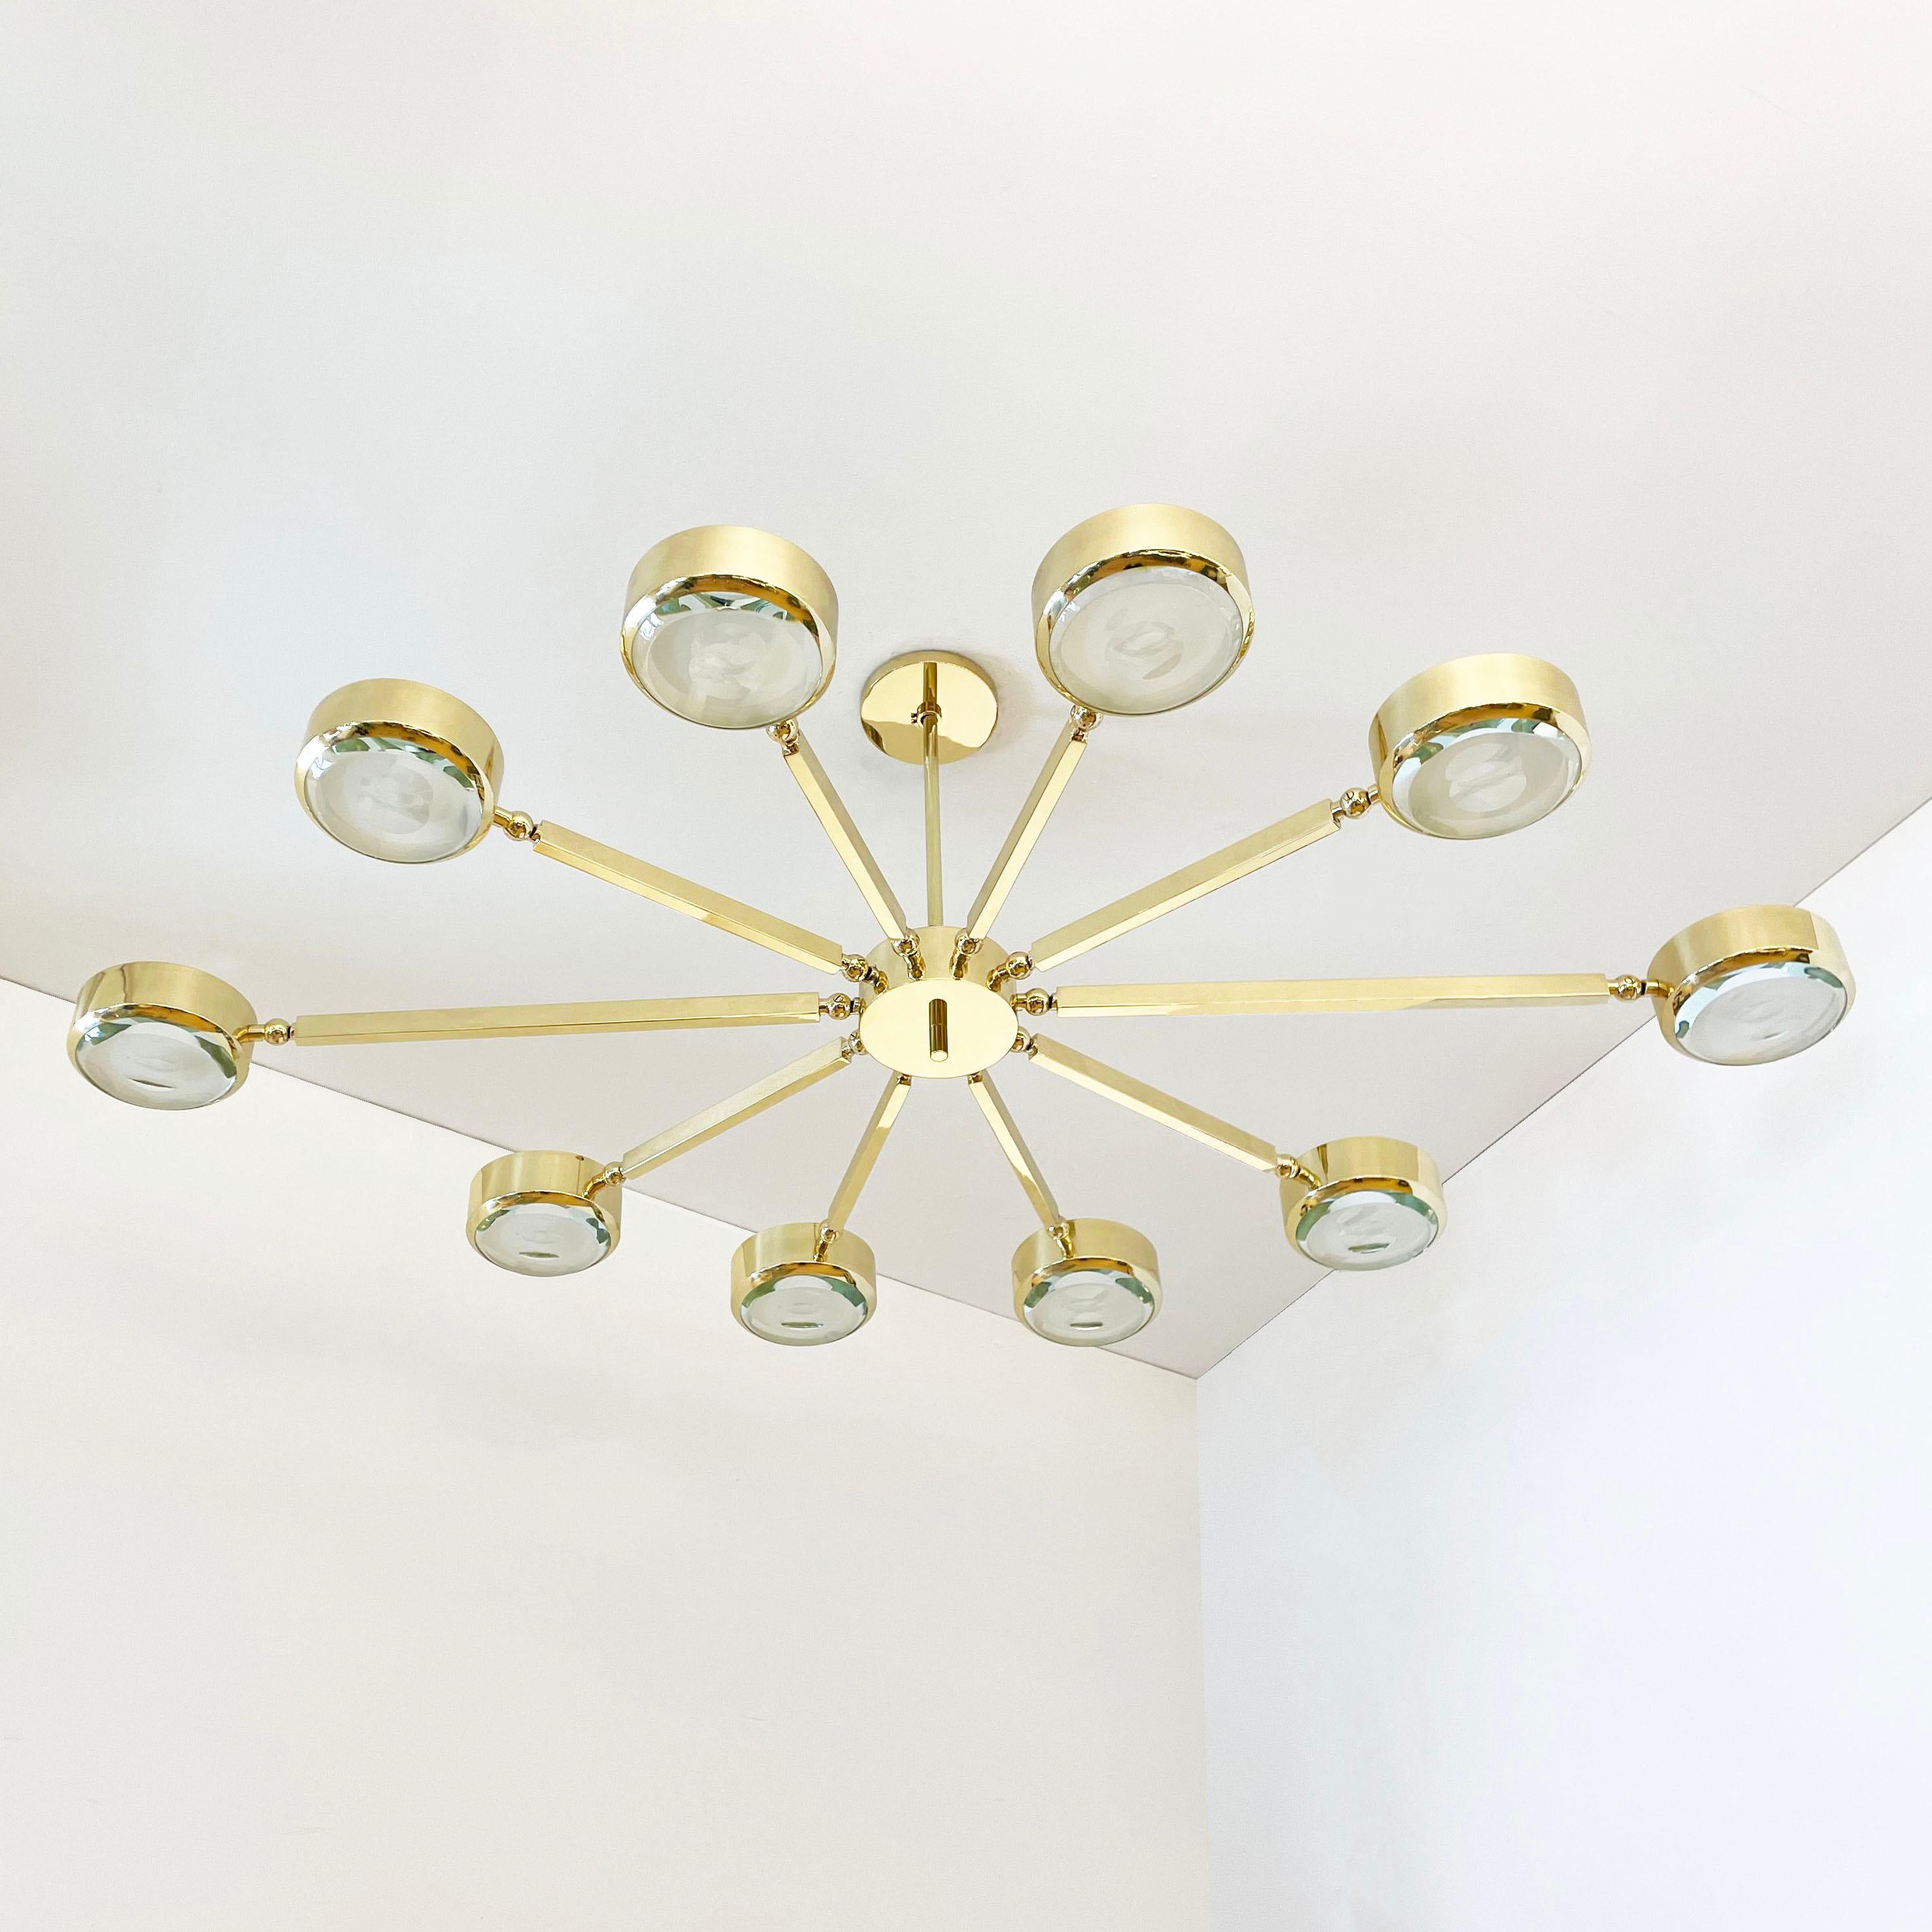 Oculus Oval Ceiling Light by Gaspare Asaro- Polished Brass with Carved Glass In New Condition For Sale In New York, NY